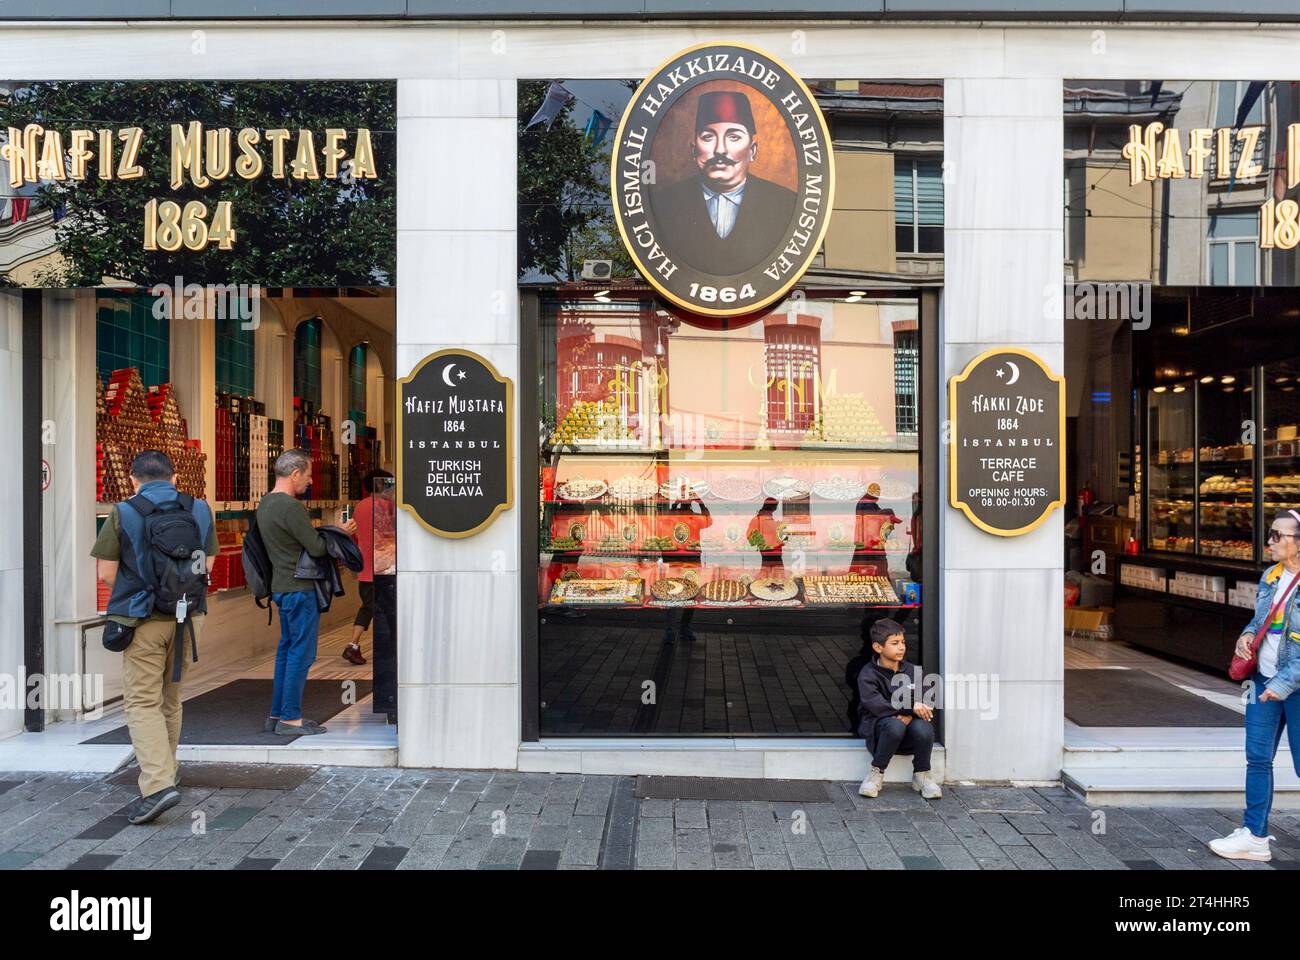 Istanbul, Turkey, Hafiz mustafa 1864 is a store that sell all kinds of Turkish delights, Editorial only. Stock Photo